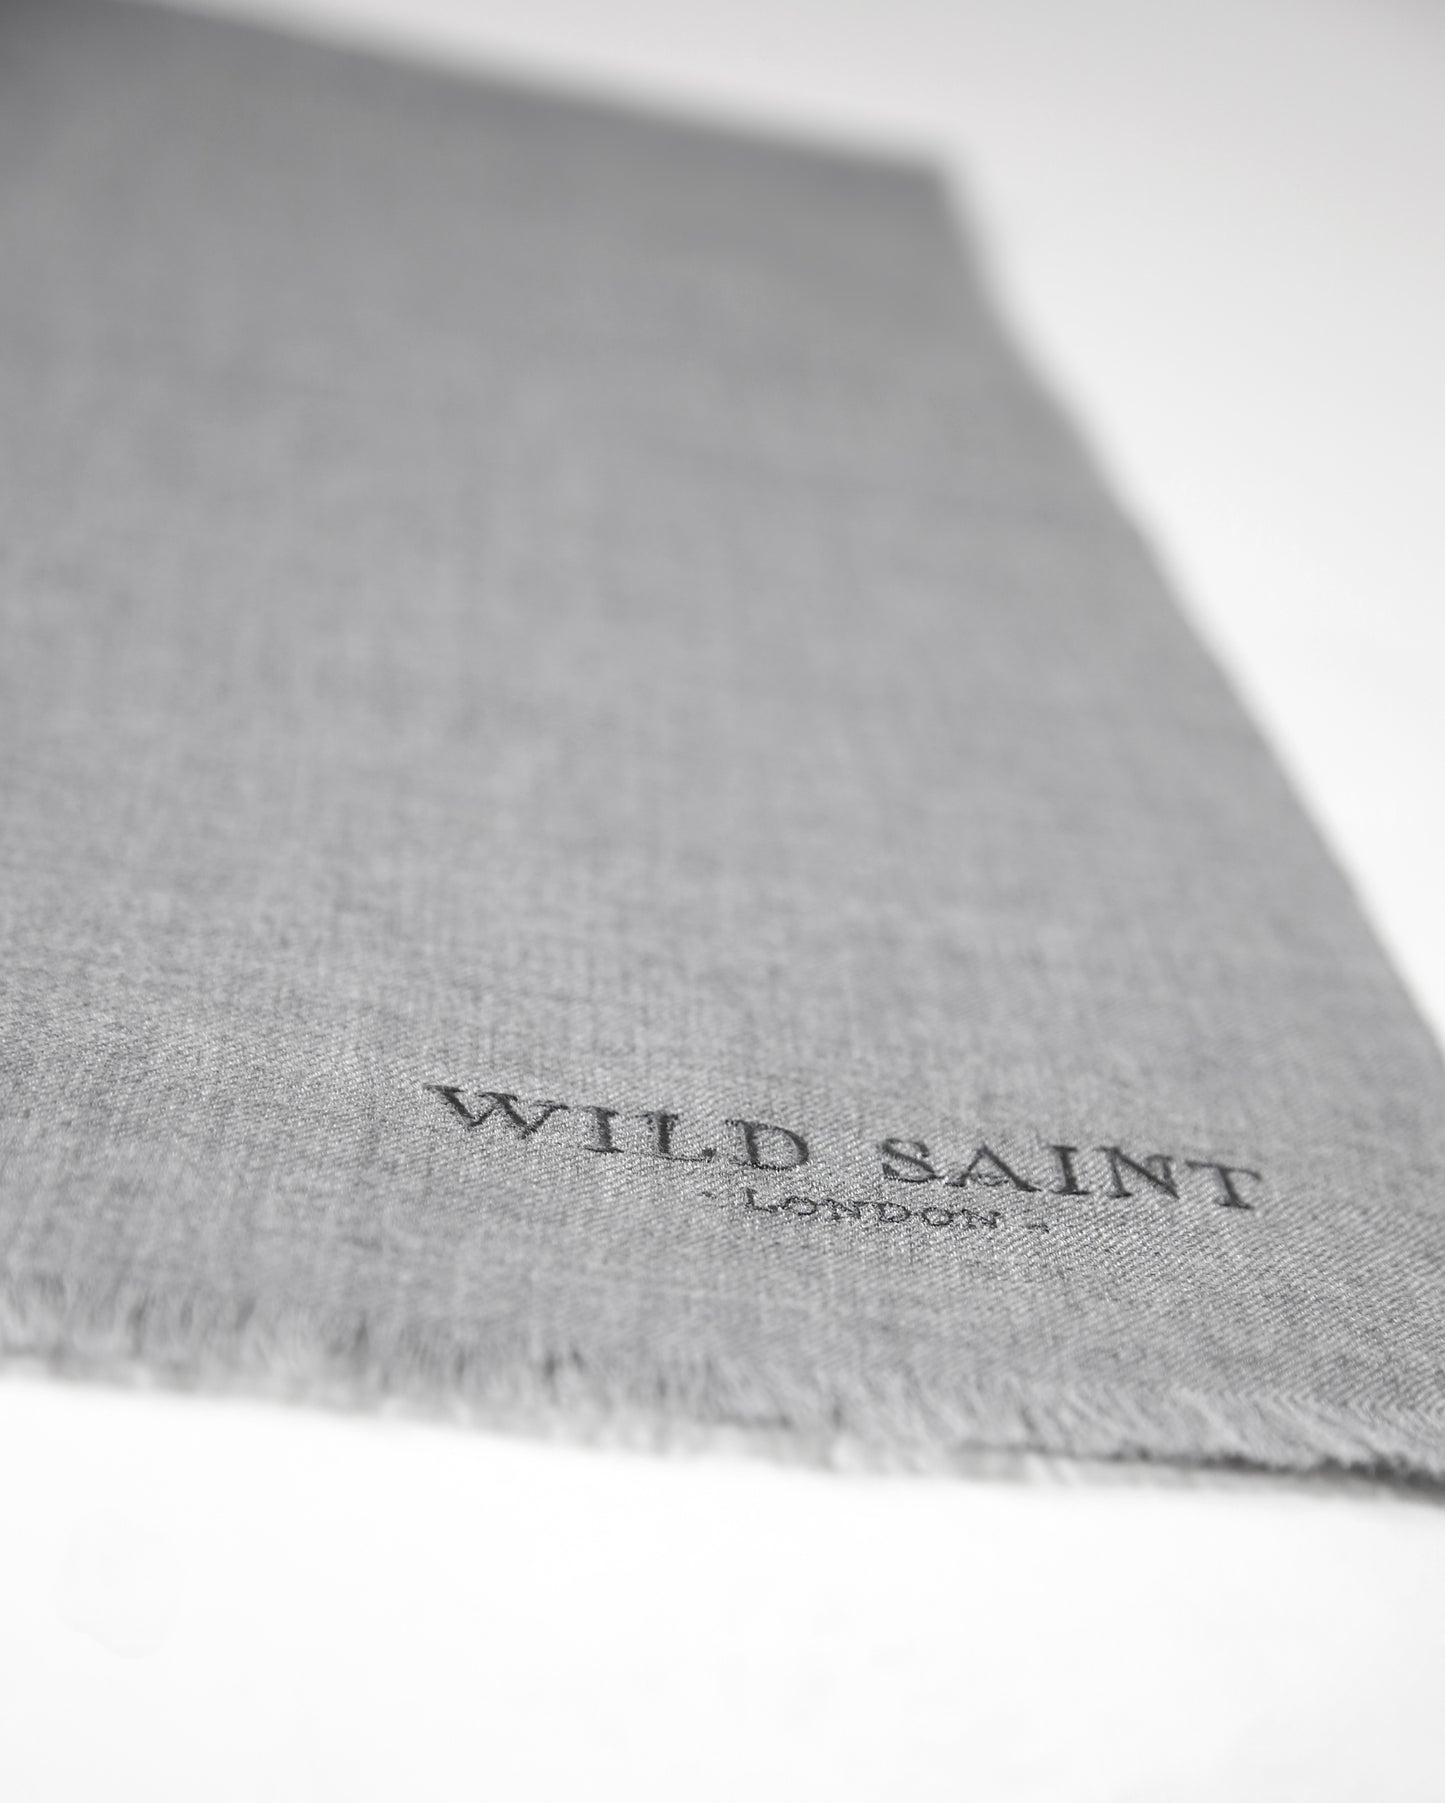 Grey lightweight 100% cashmere scarf for women and men. Includes complimentary personlisation. Luxury cashmere scarves made in Italy